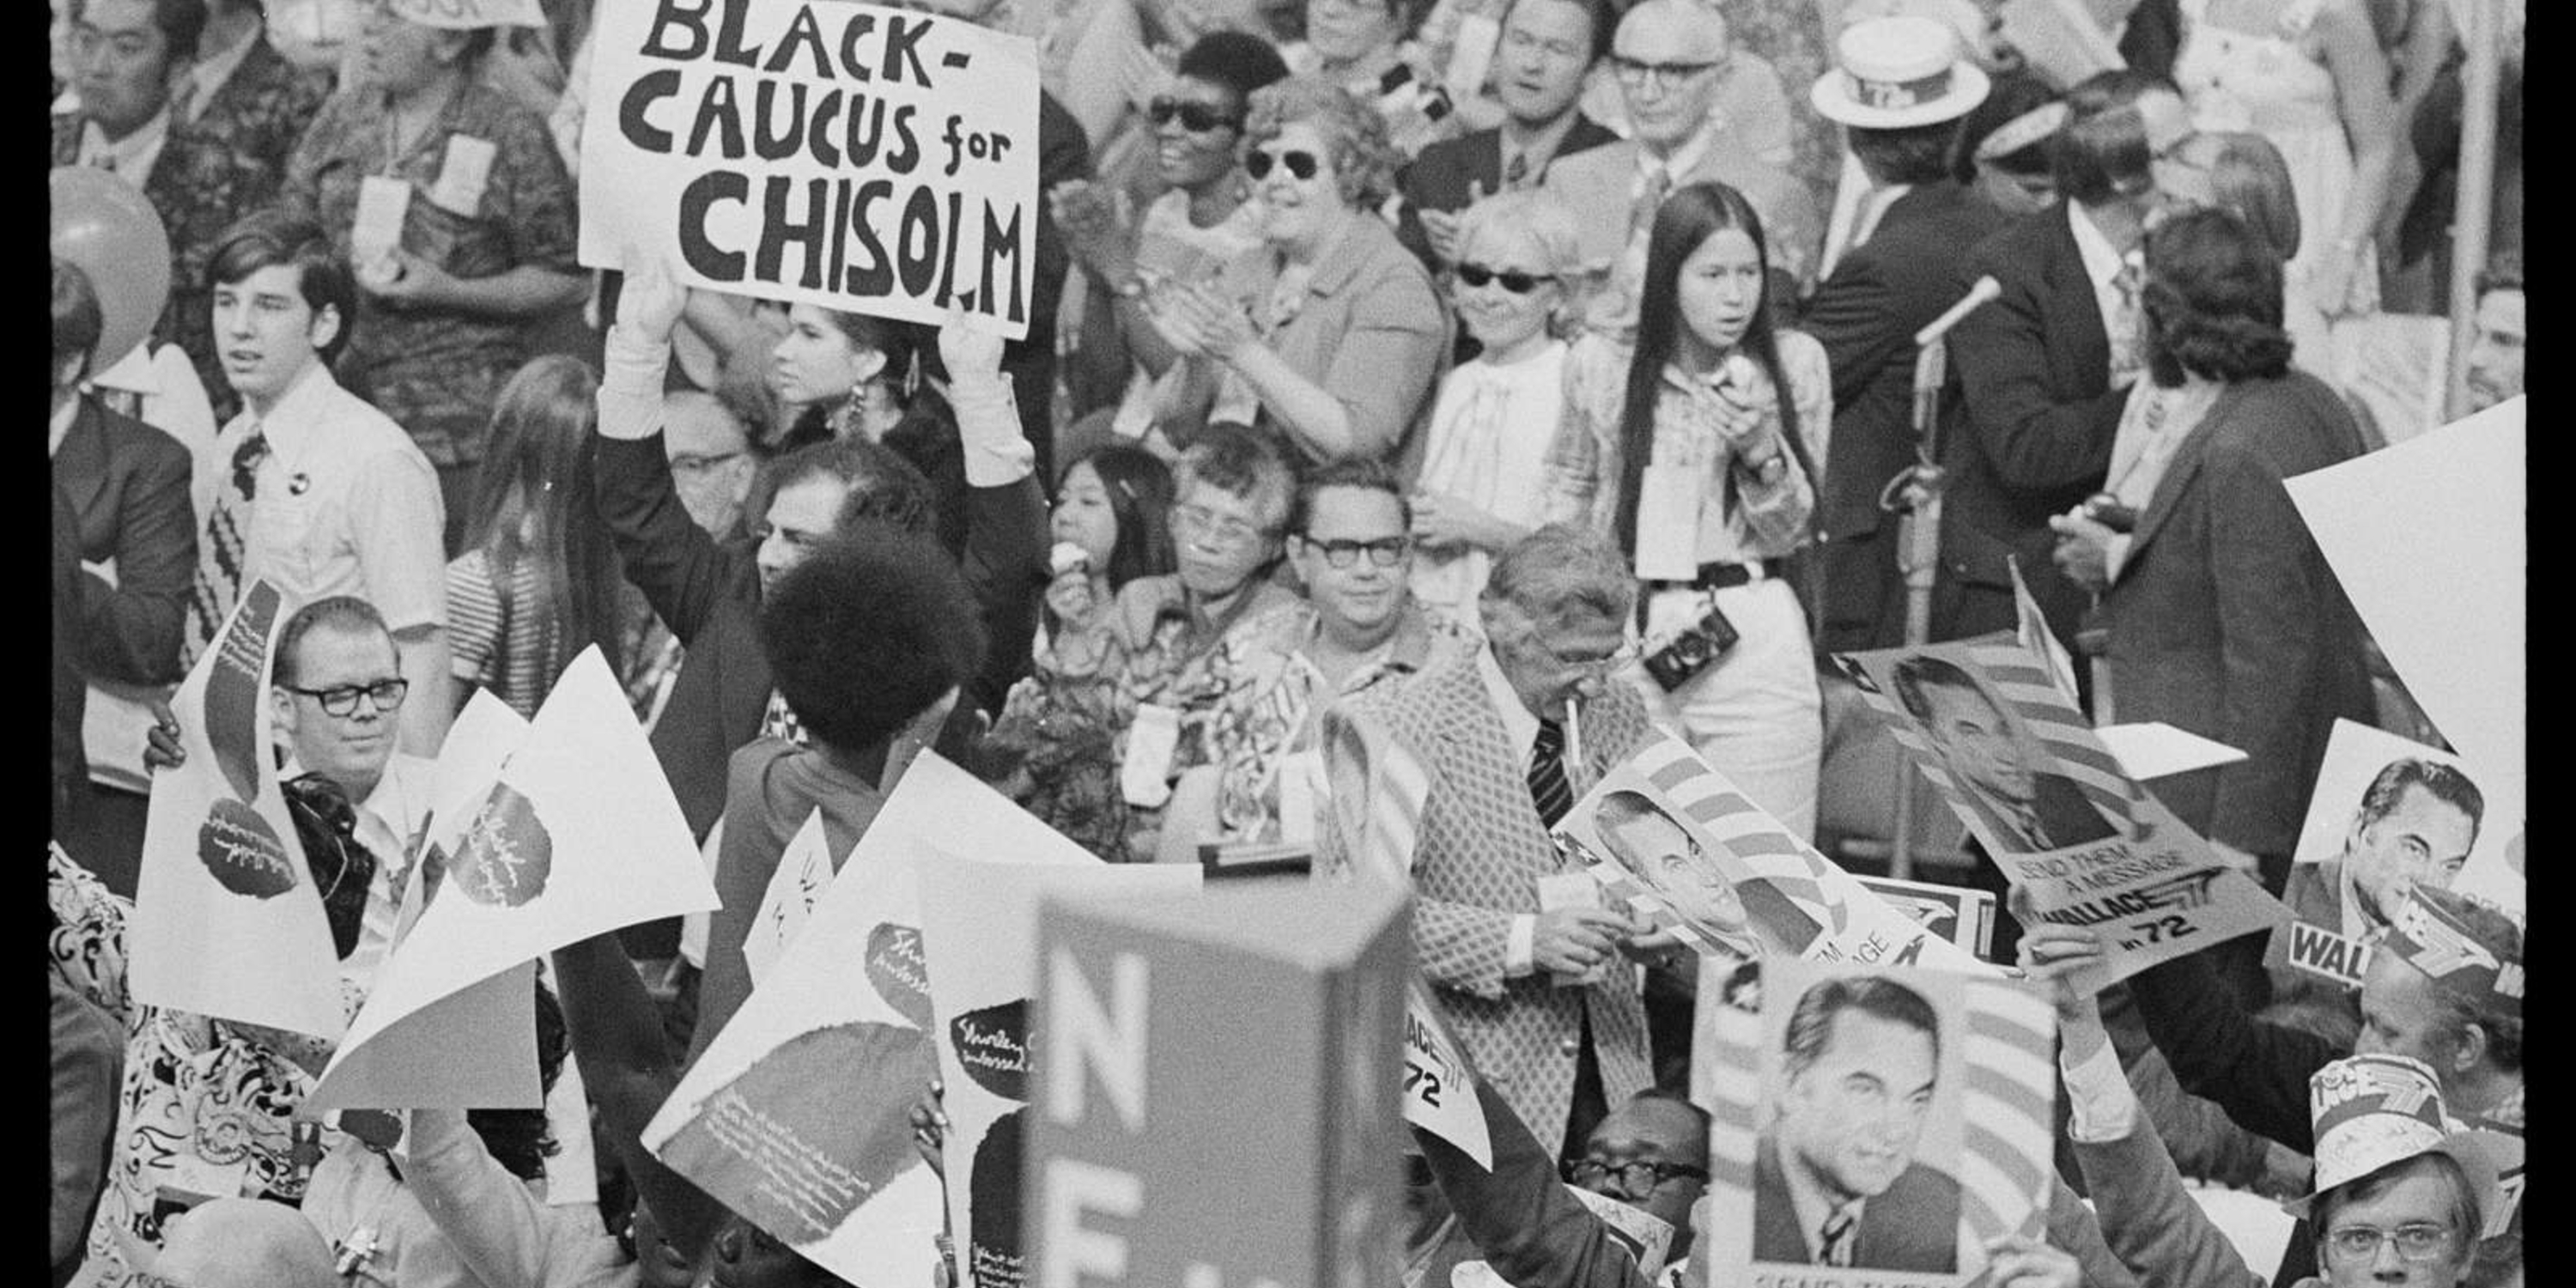 Crowd with sign: "Black Caucus for Chisholm"